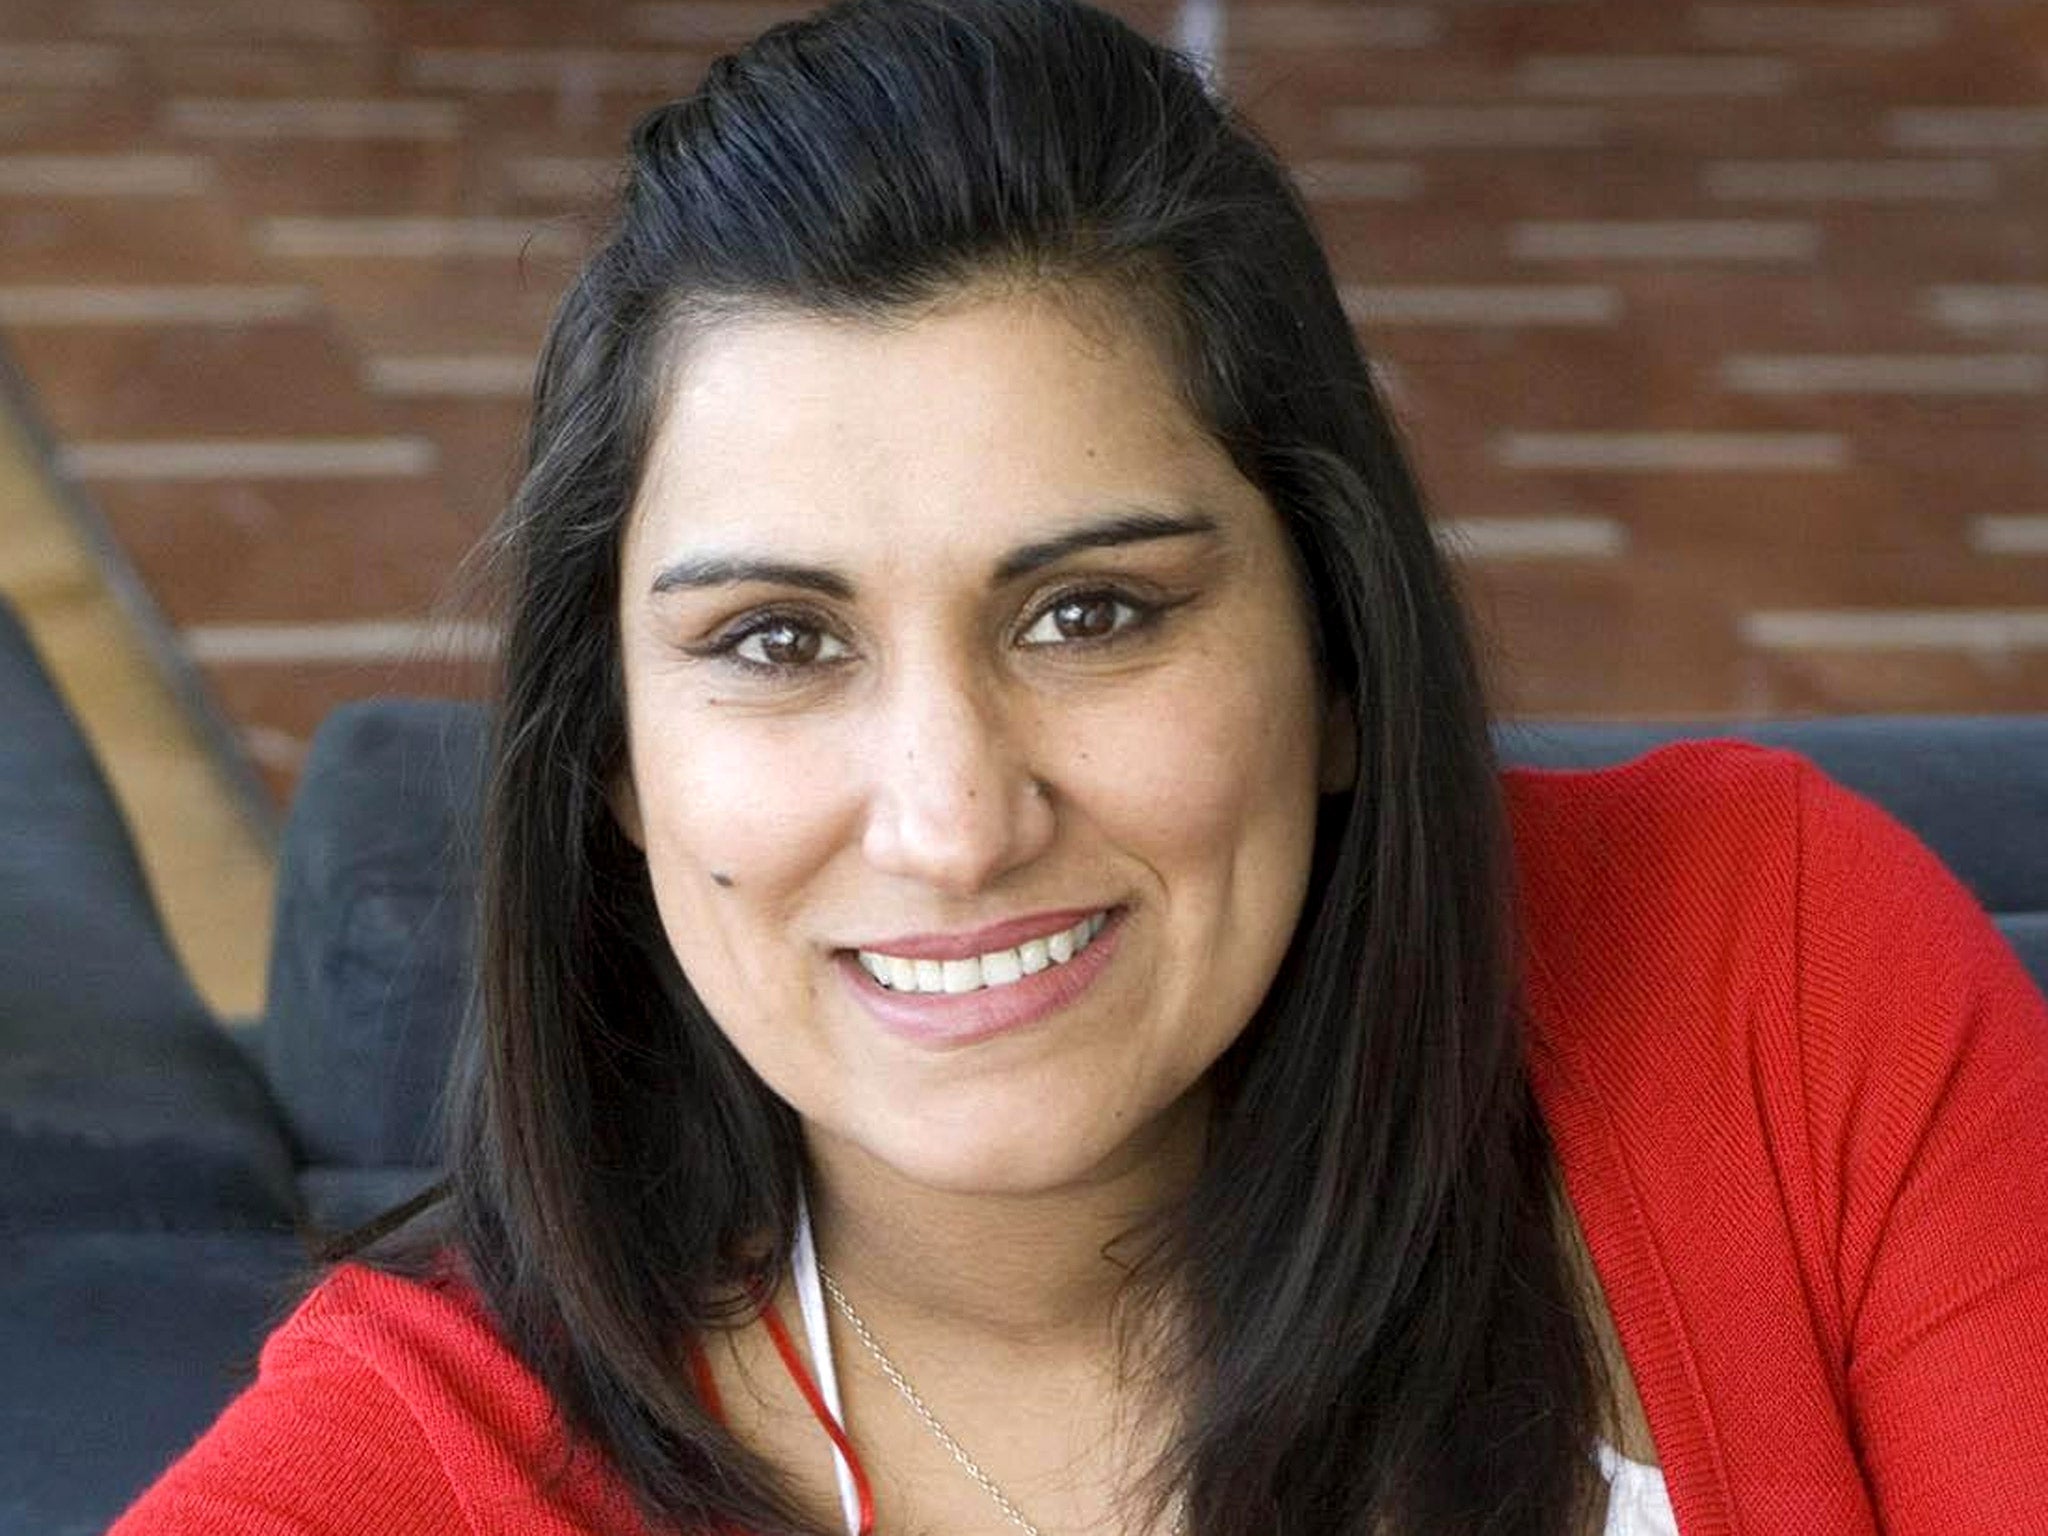 Jasvinder Sanghera is a campaigner on a range of women’s issues